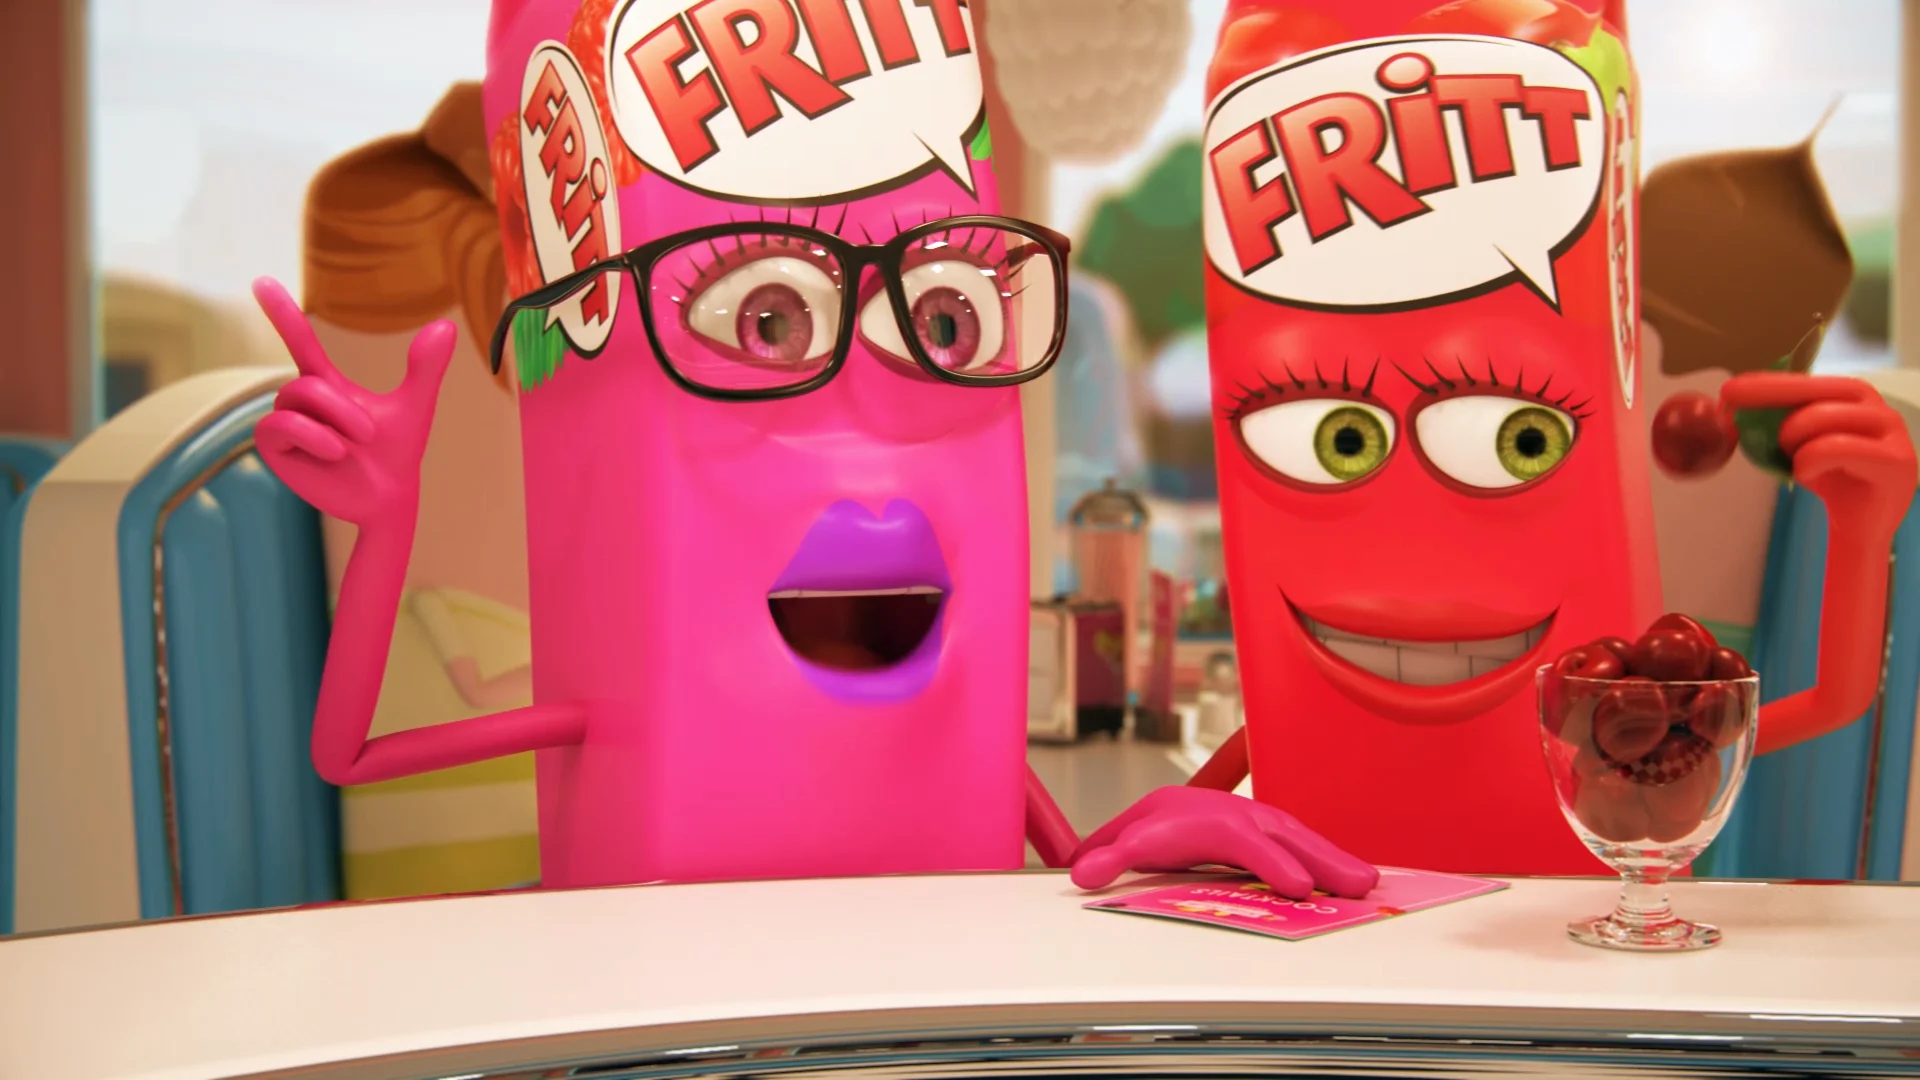 scene takes place in a bar where two differently colored Fritt-shaped packshot characters are talking to someone while one of them is eating cherries